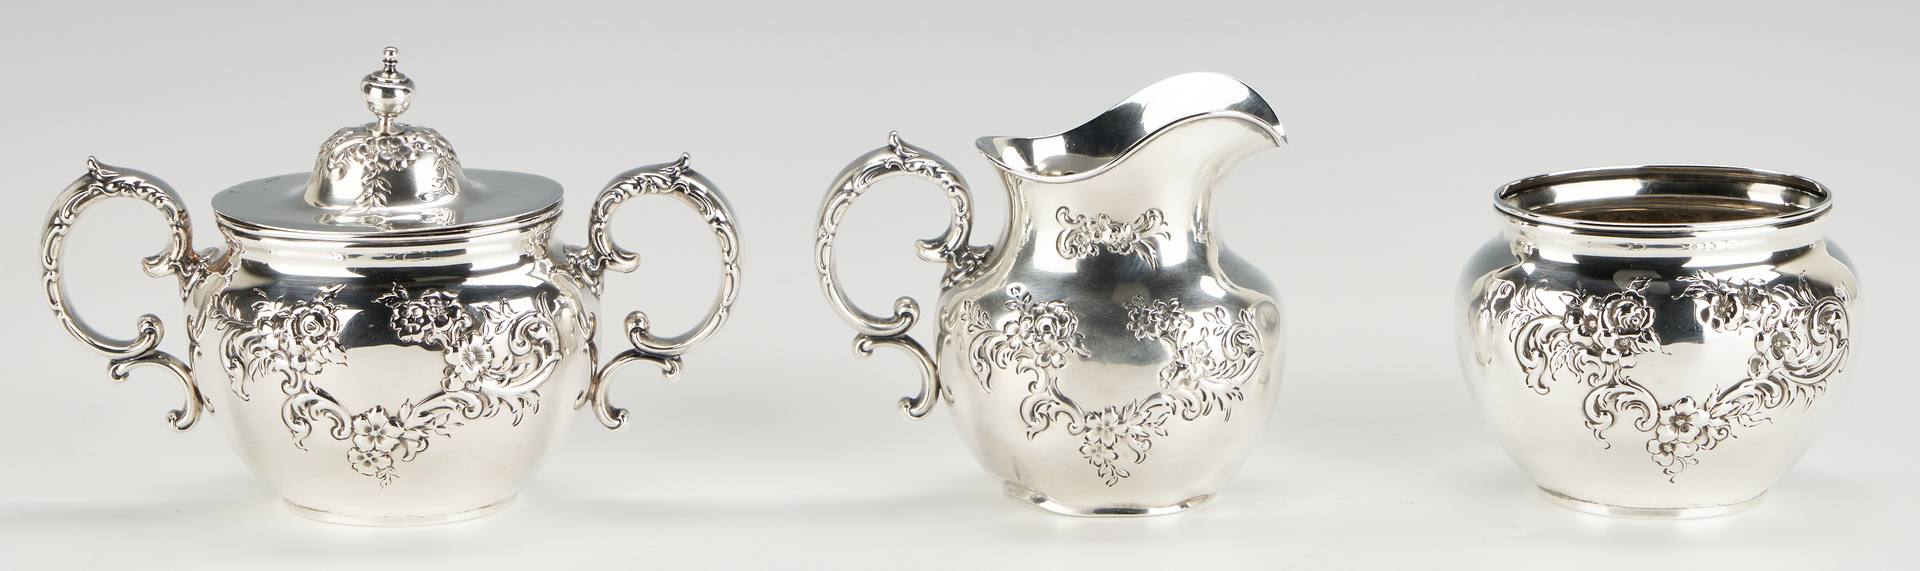 Lot 435: Whiting Sterling Repousse Tea Set, 5 pieces